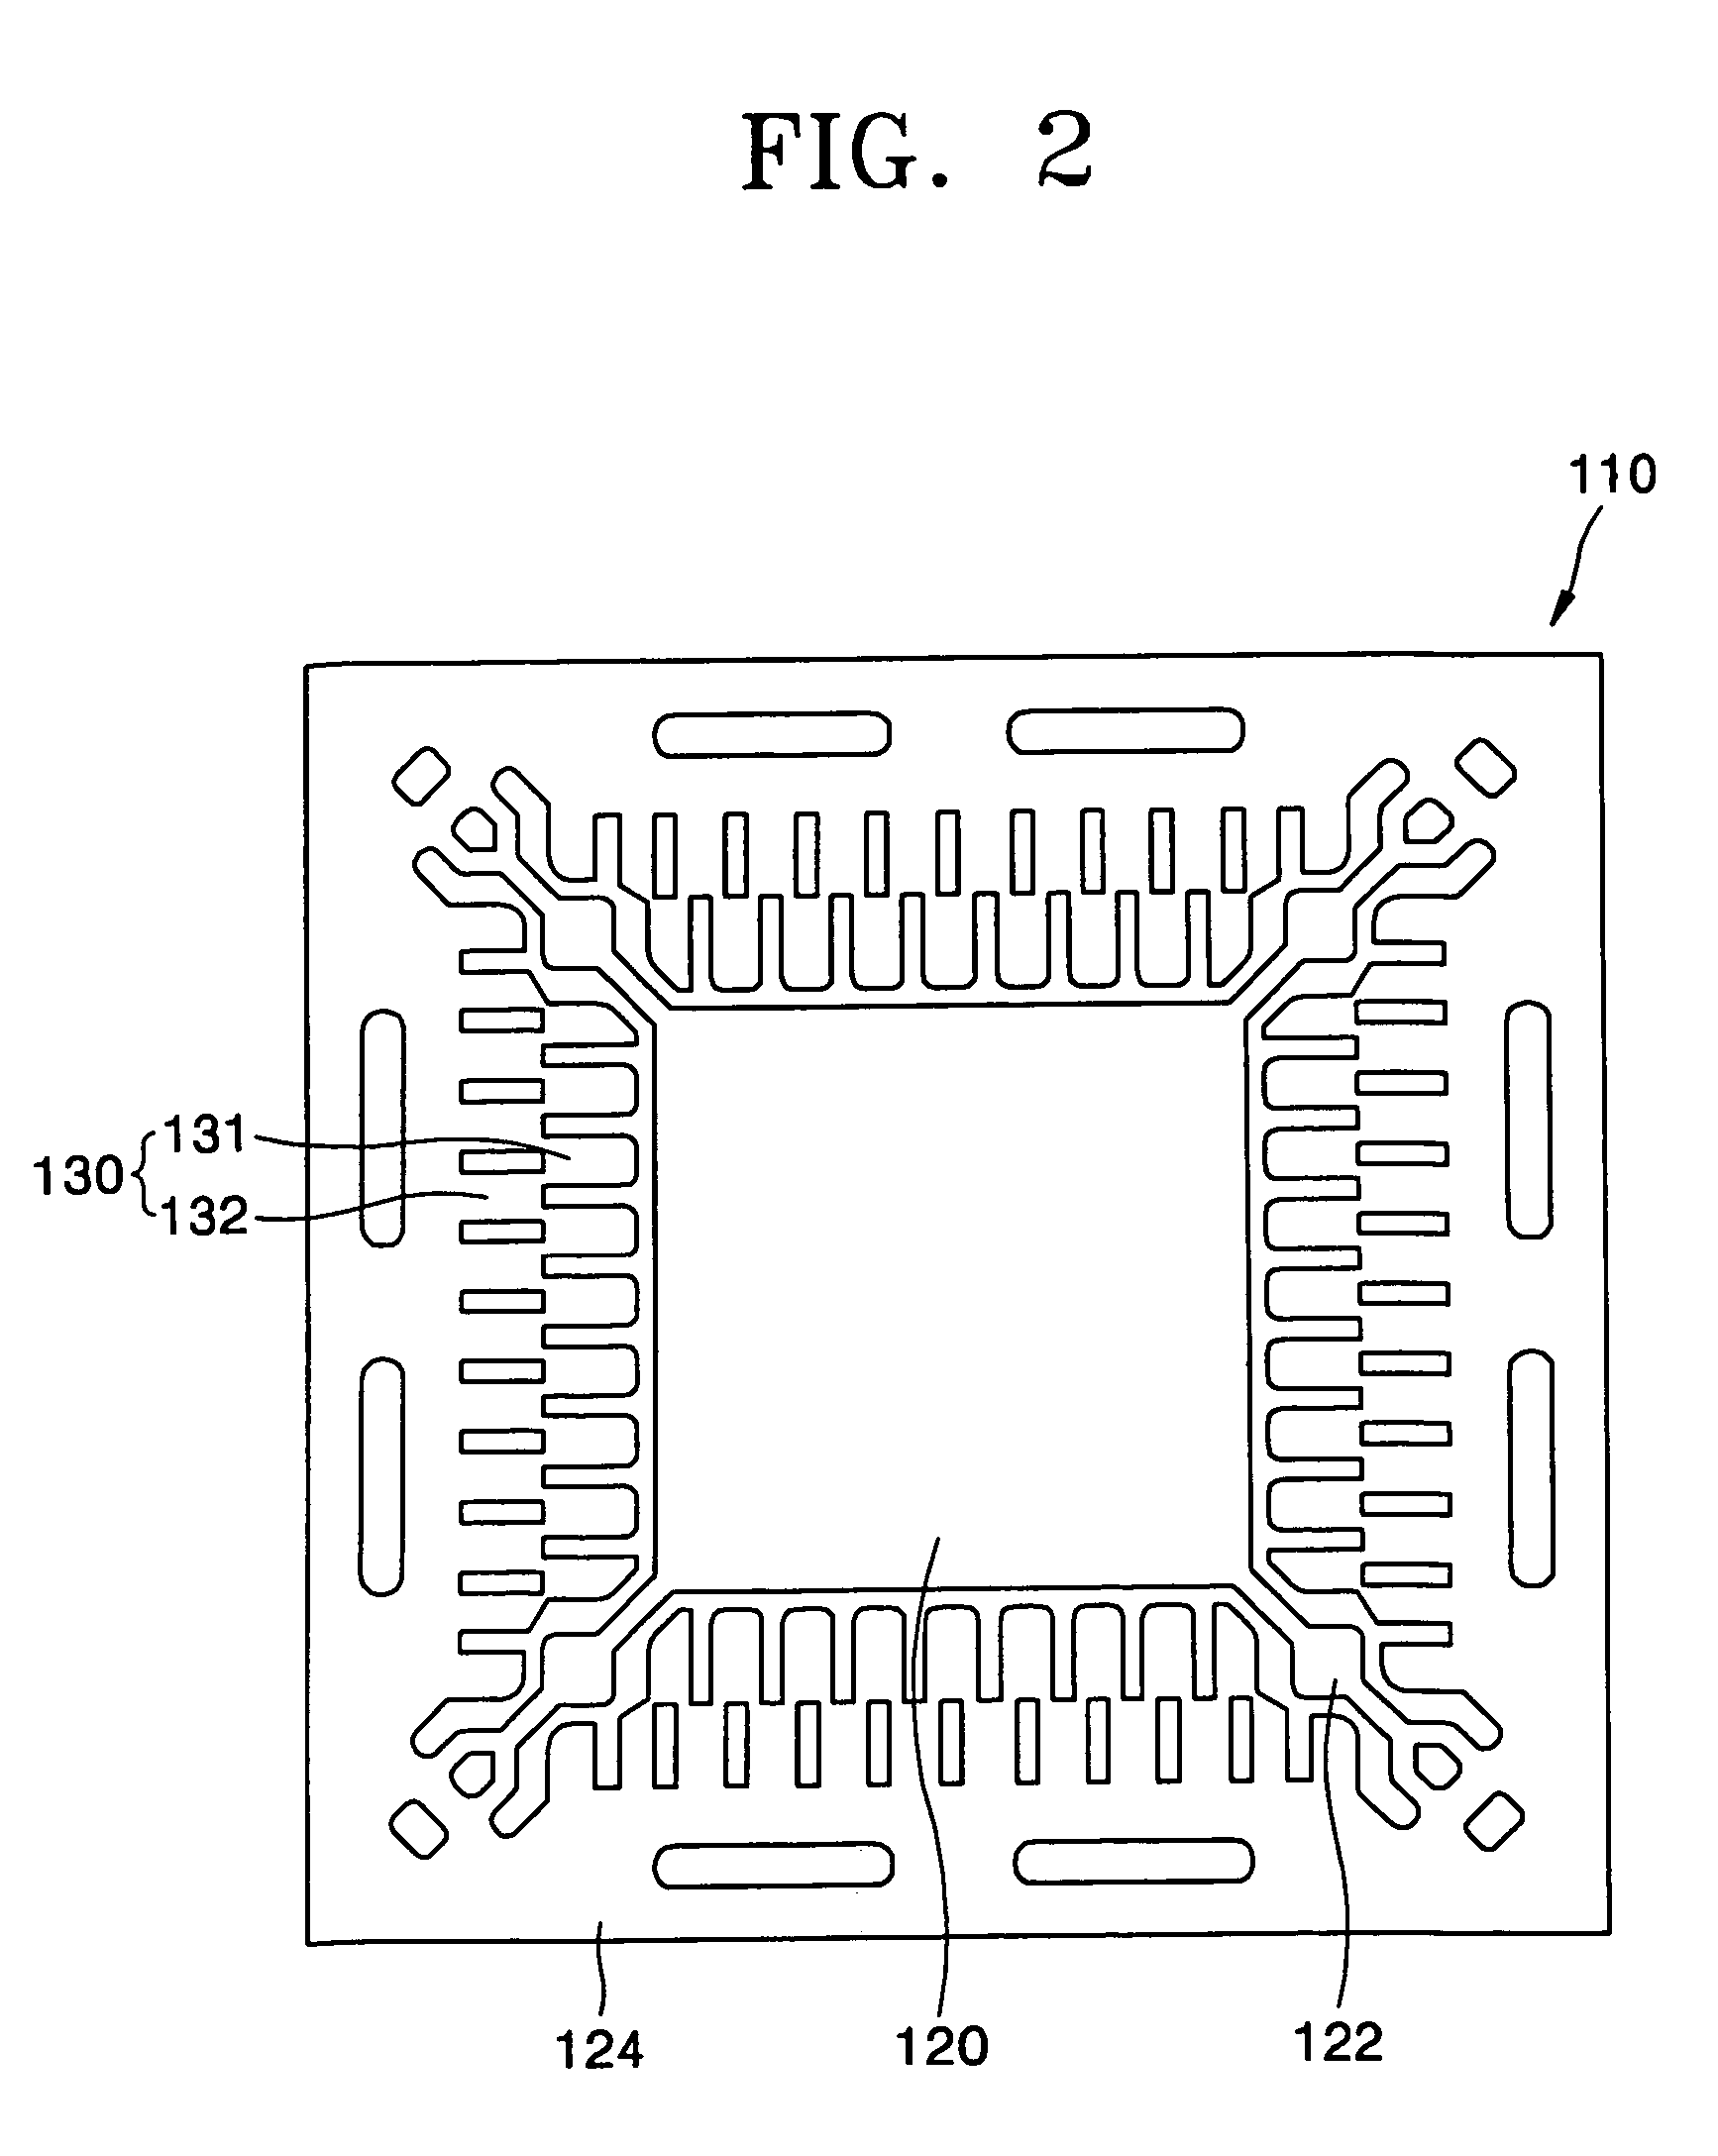 Semiconductor package having multiple row of leads